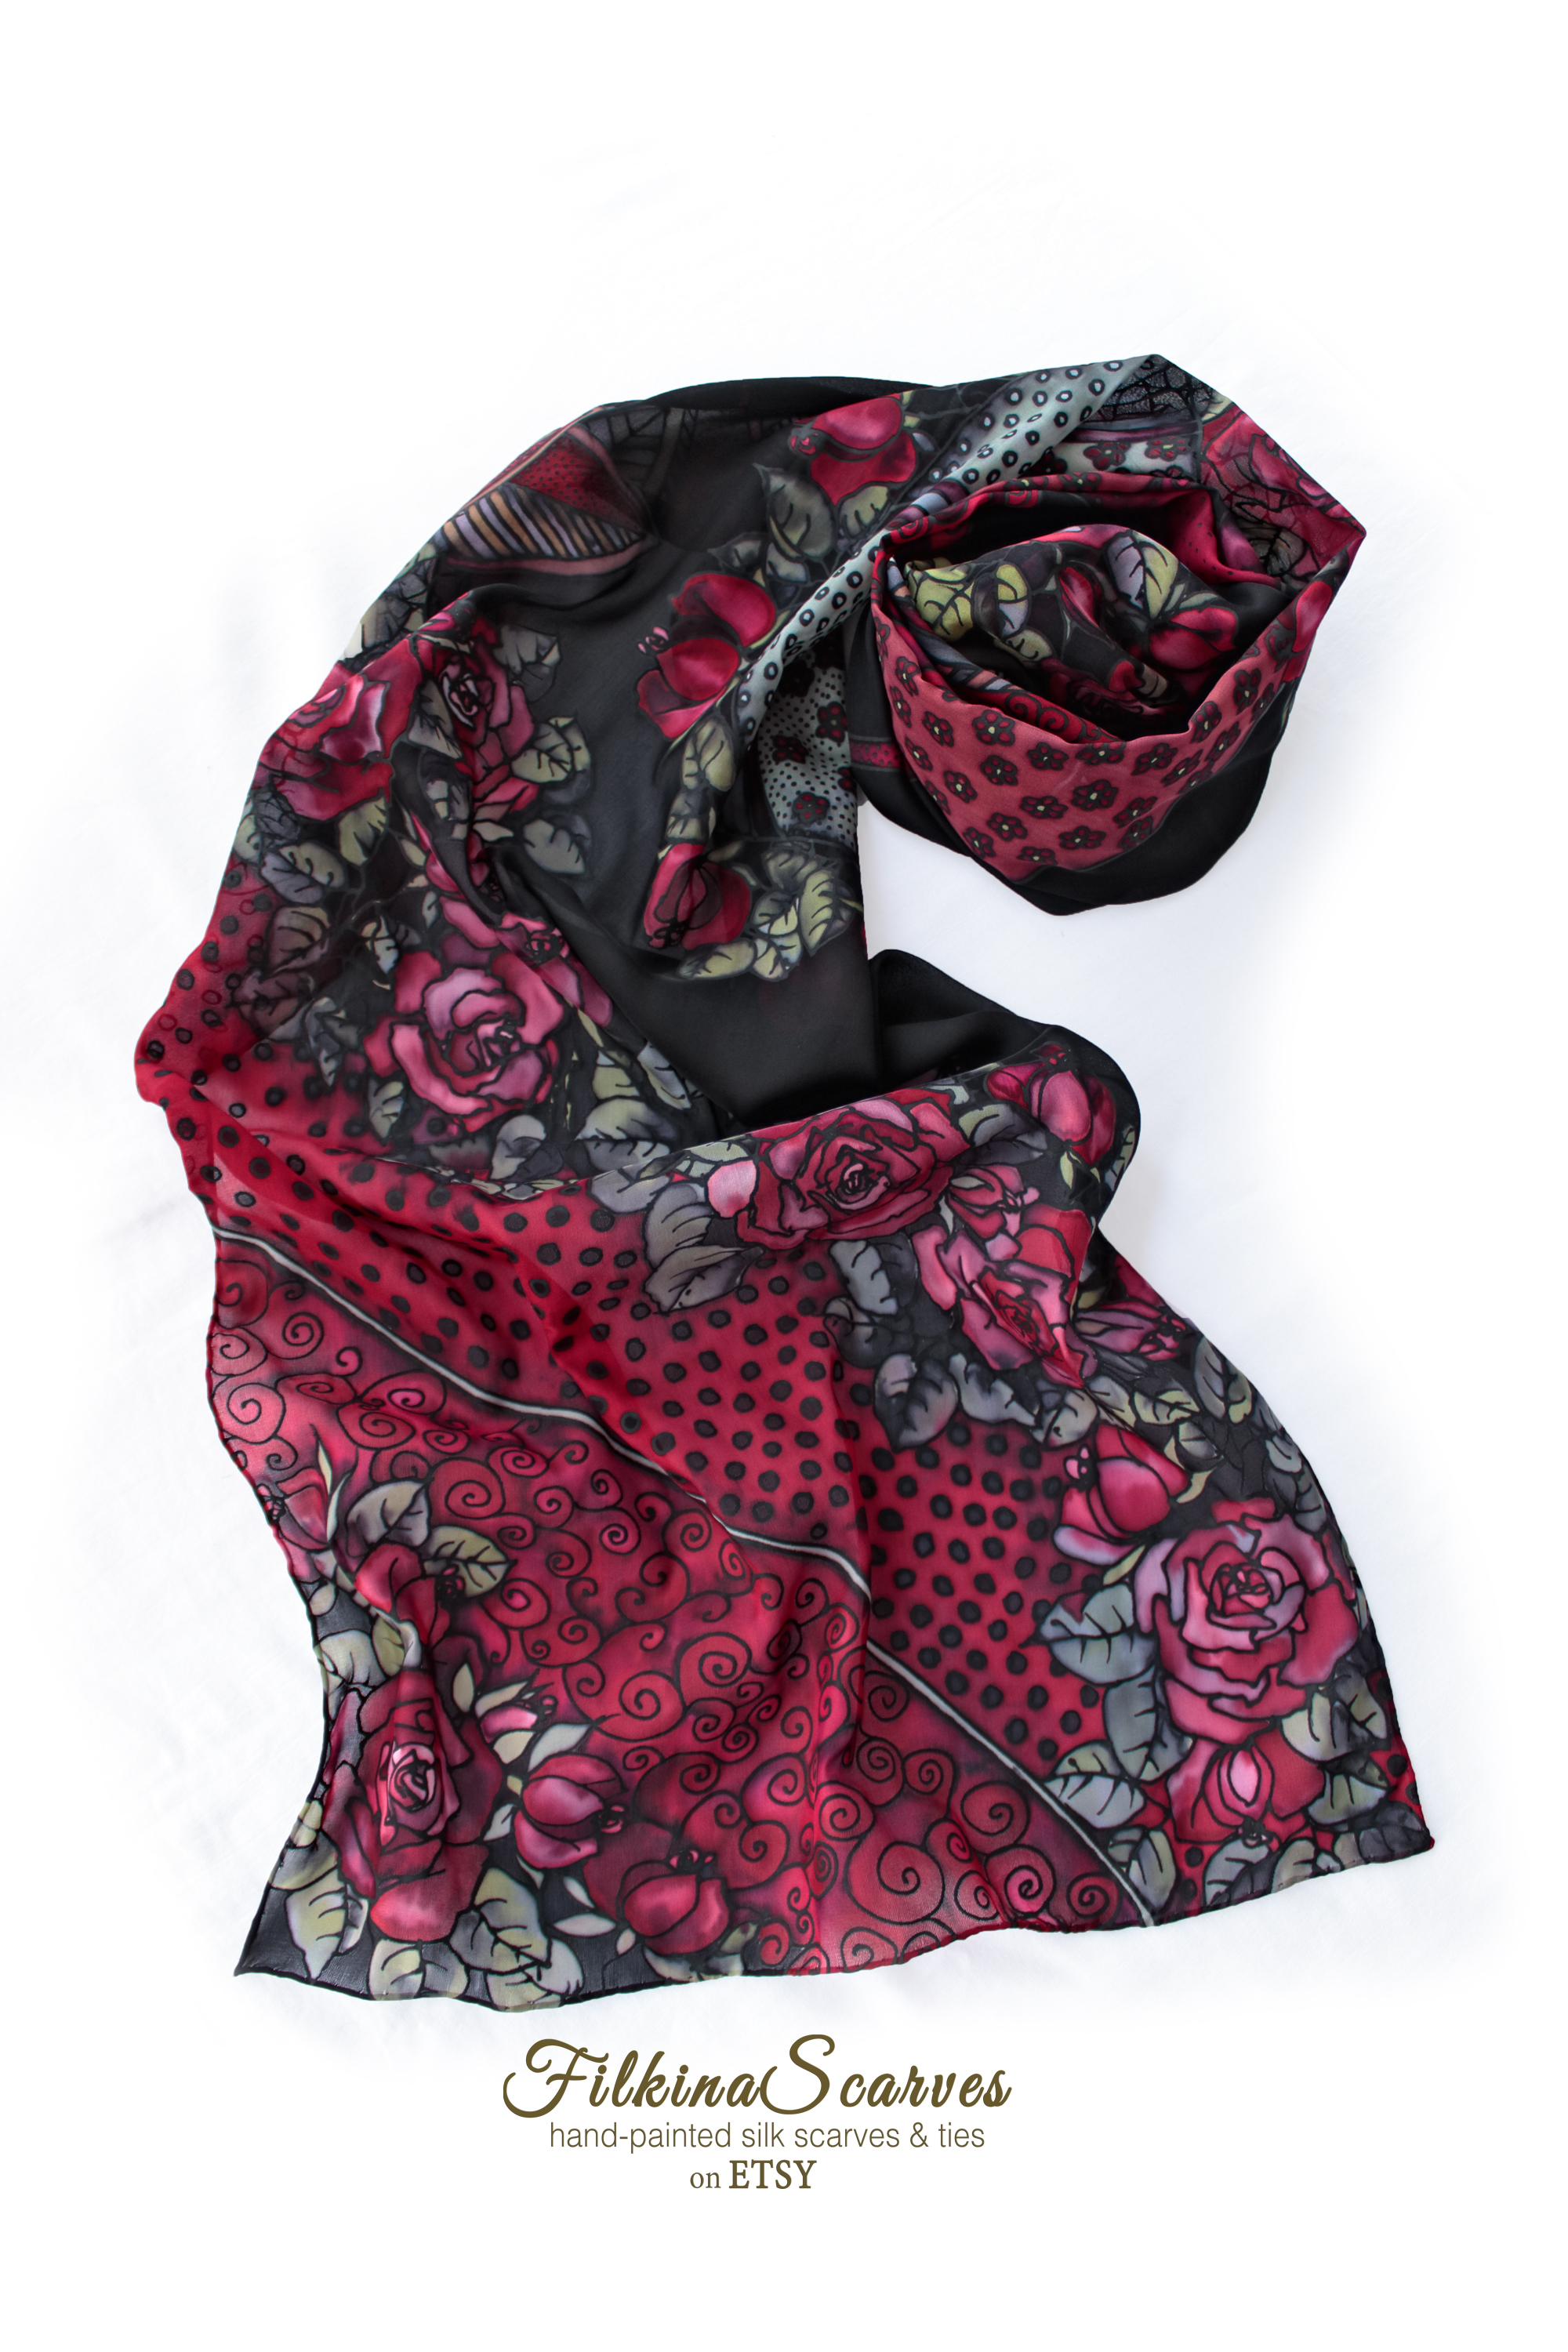 Hand-PAINTED Black and Red Women Silk Scarf with Roses. Silk chiffon scarf